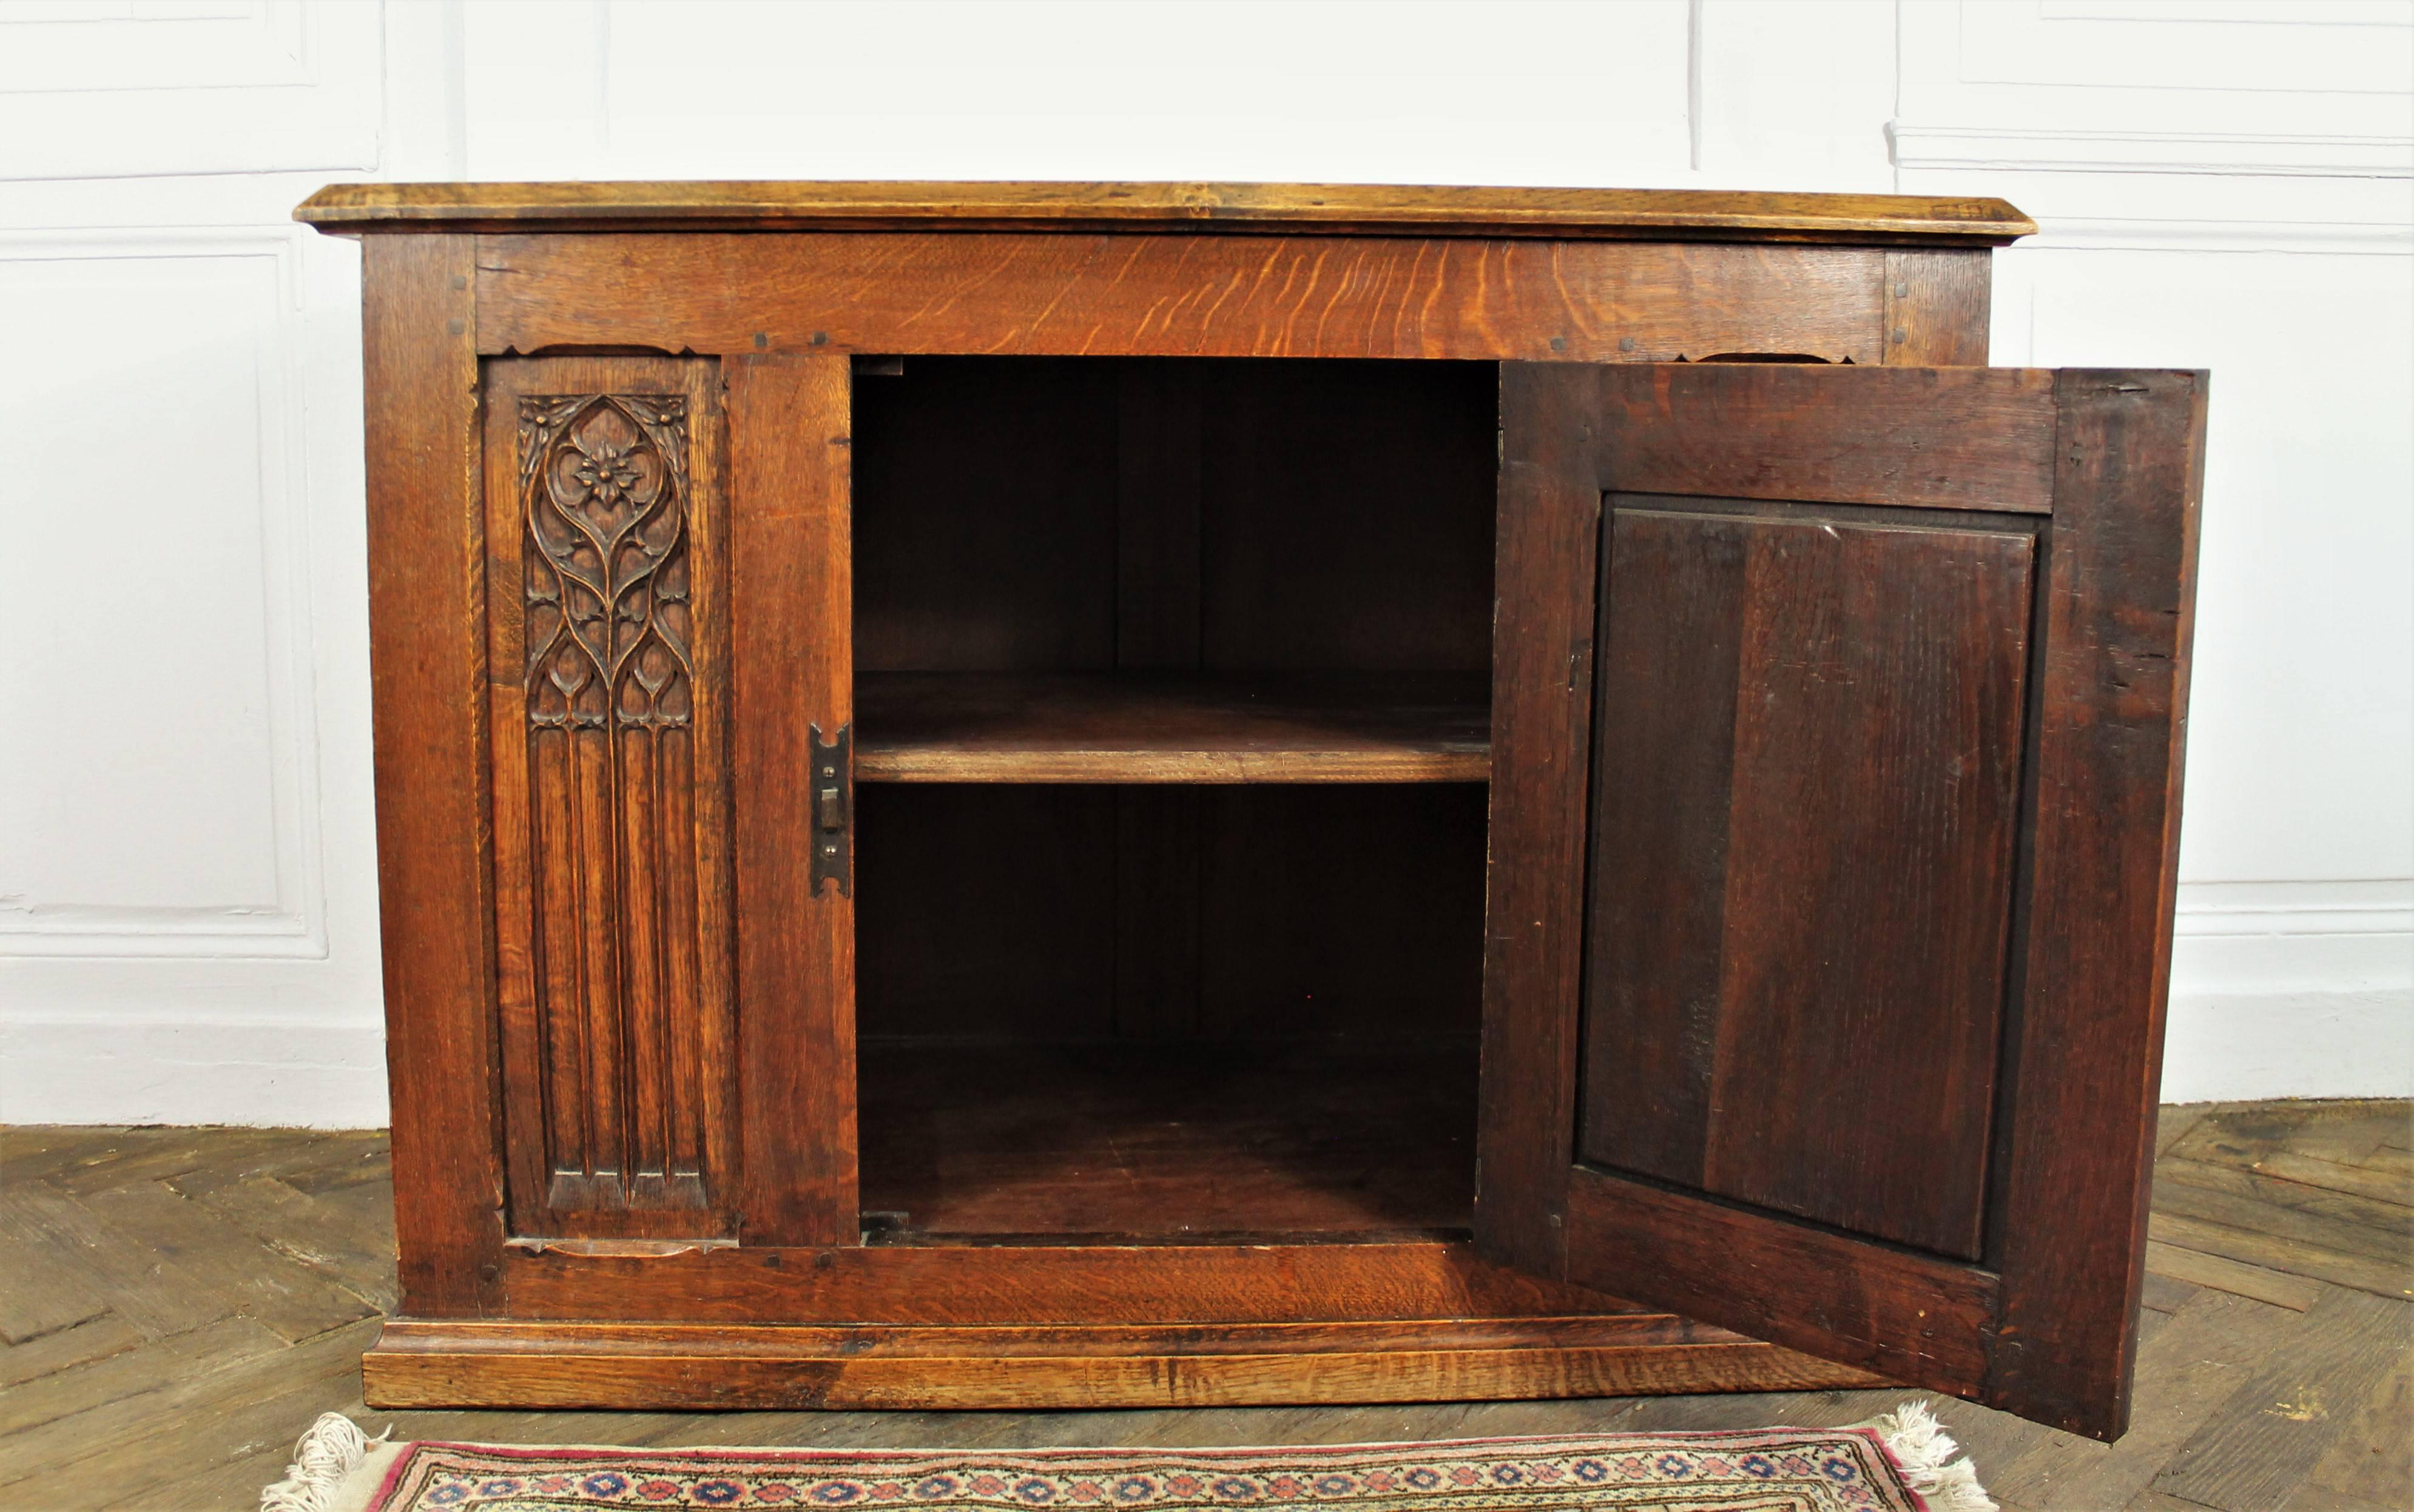 French Gothic Revival Armoire with an Oak Door